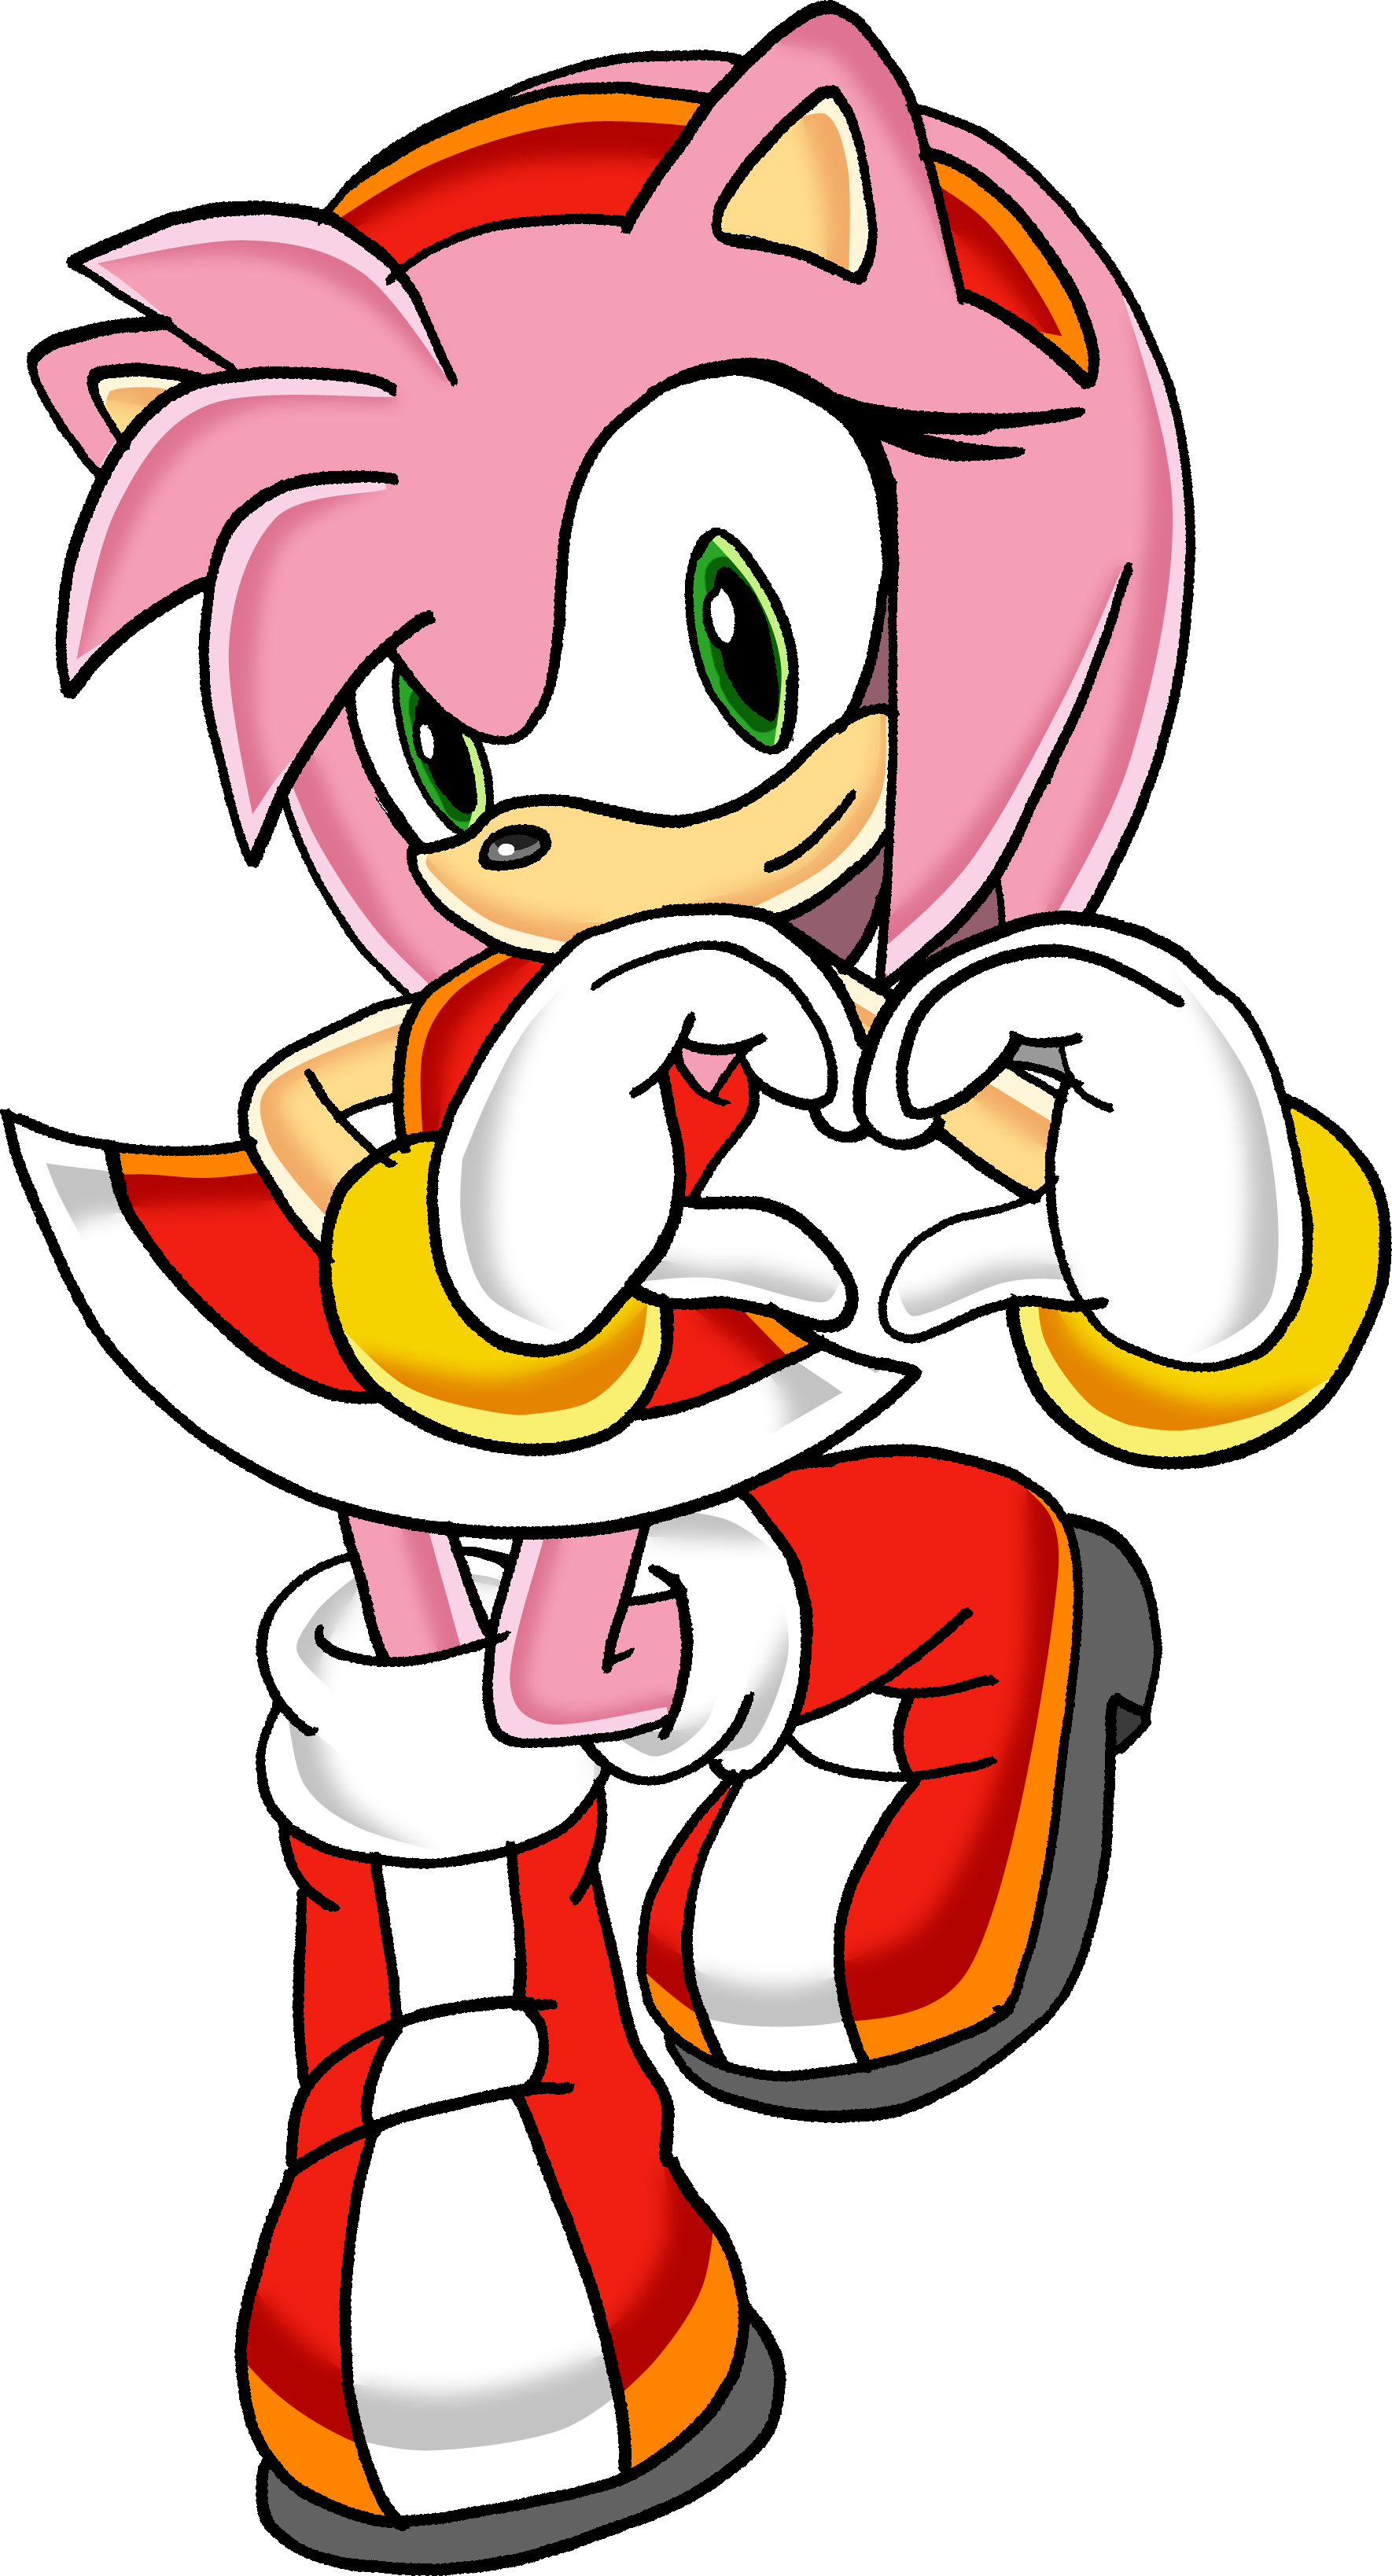 Amy Rose Tails19950 - Sonic The Hedgehog 4 (1770x3276)